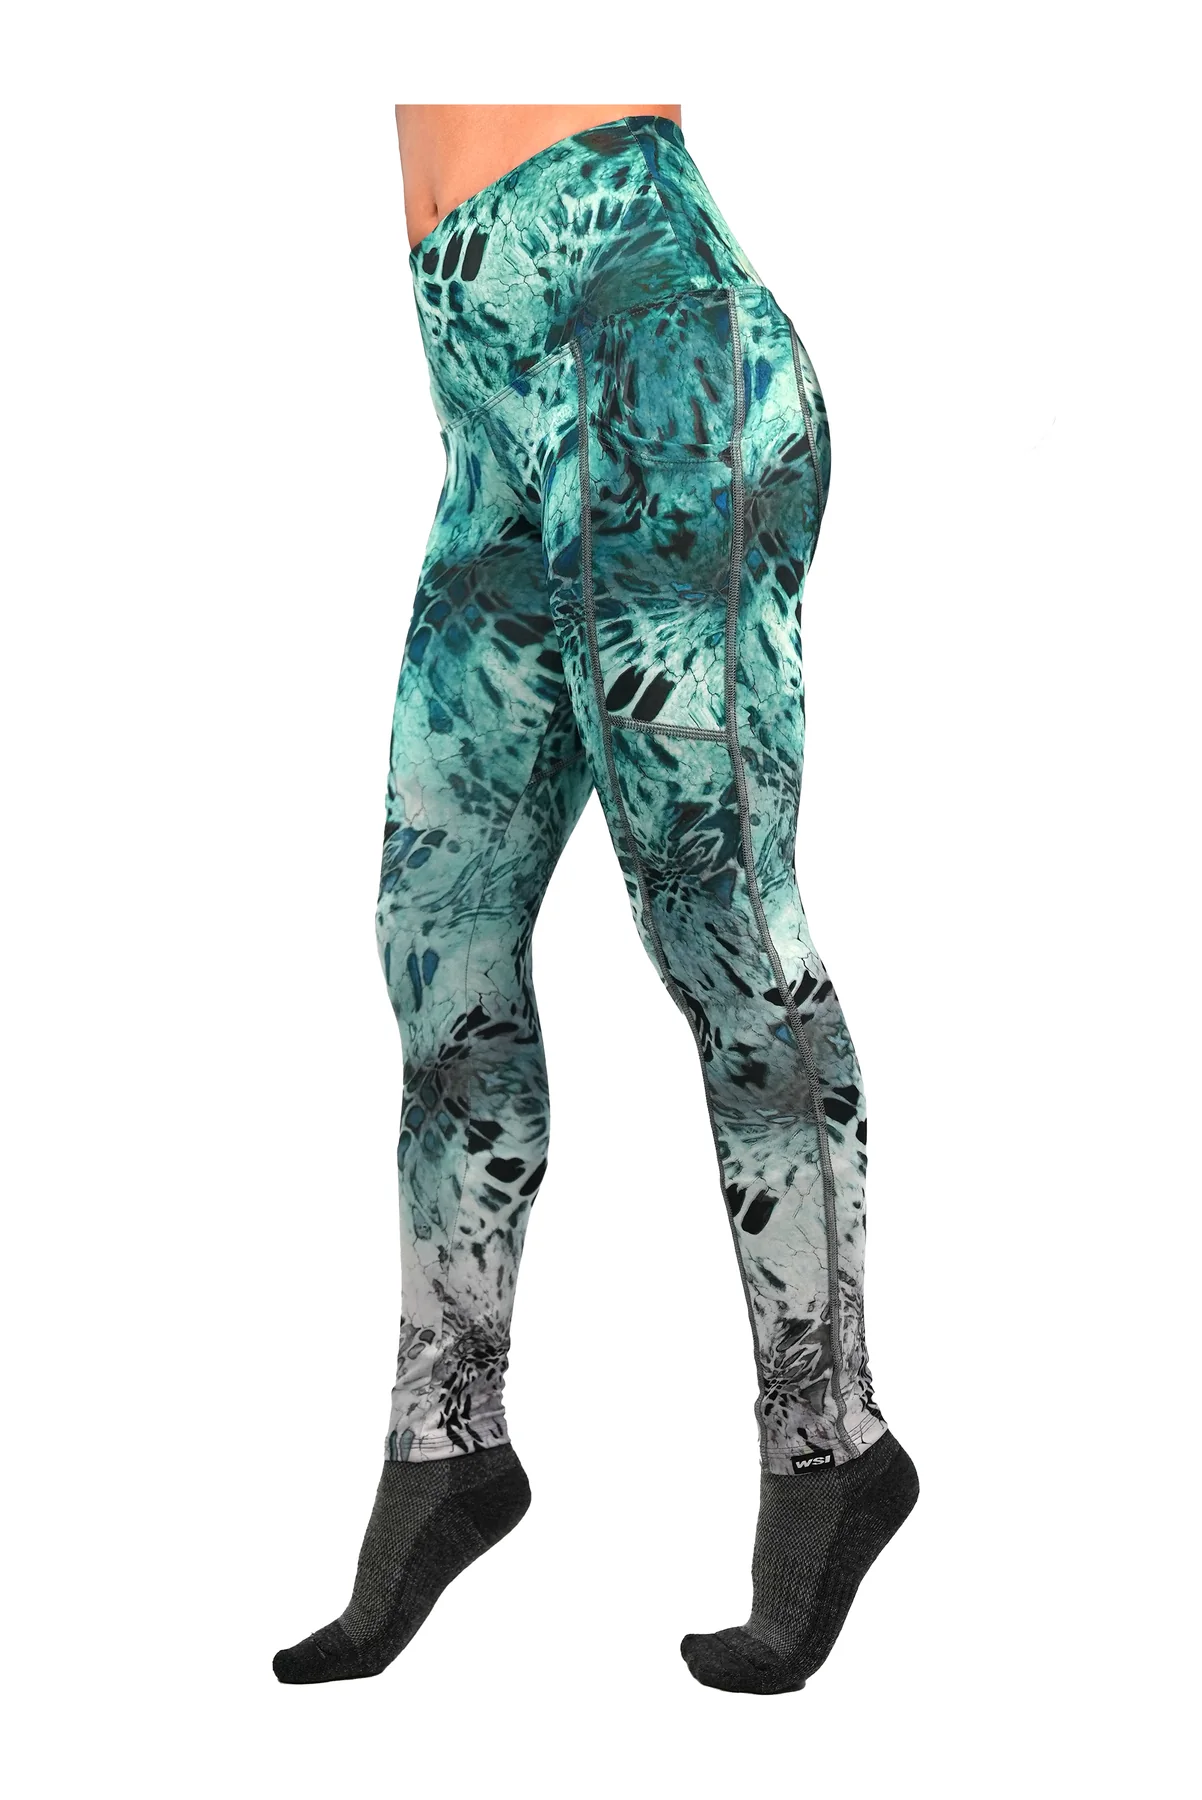 WSI Sports Women's WIDE WAISTBAND TYPHOON POCKETED LEGGING posted by ProdOrigin USA in Women's Apparel 